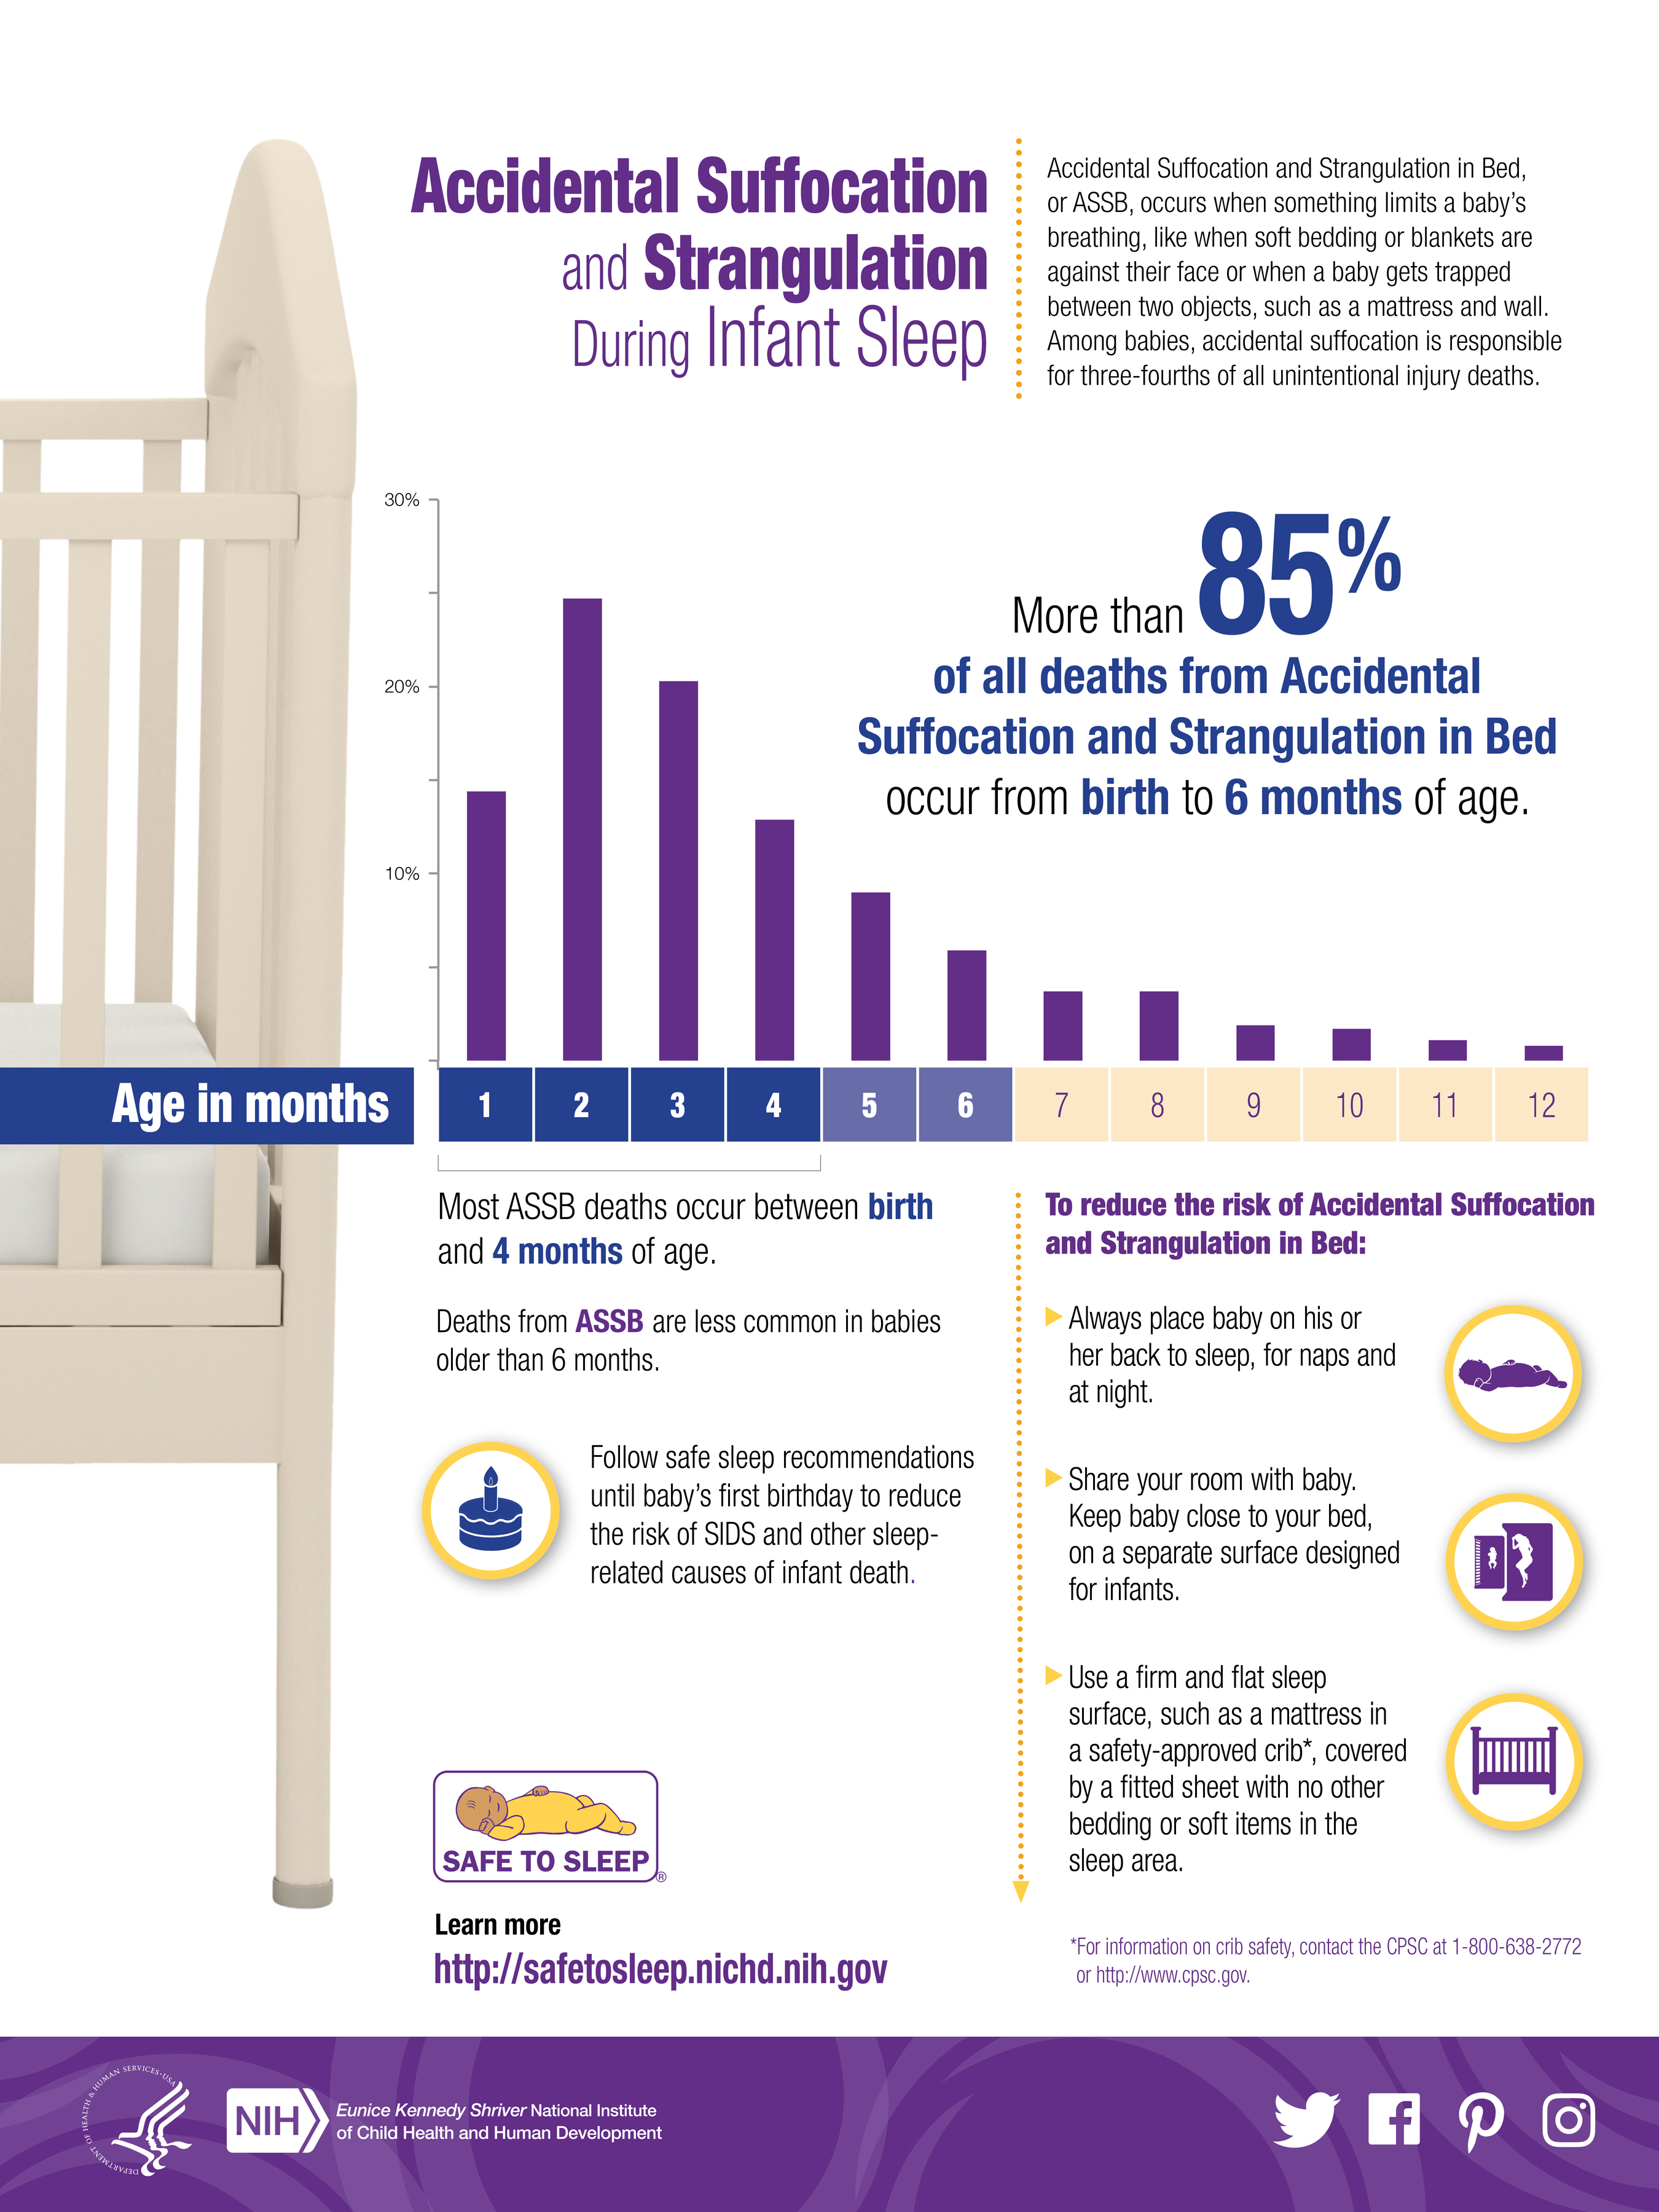 Accidental Suffocation and Strangulation During Infant Sleep inforgraphic